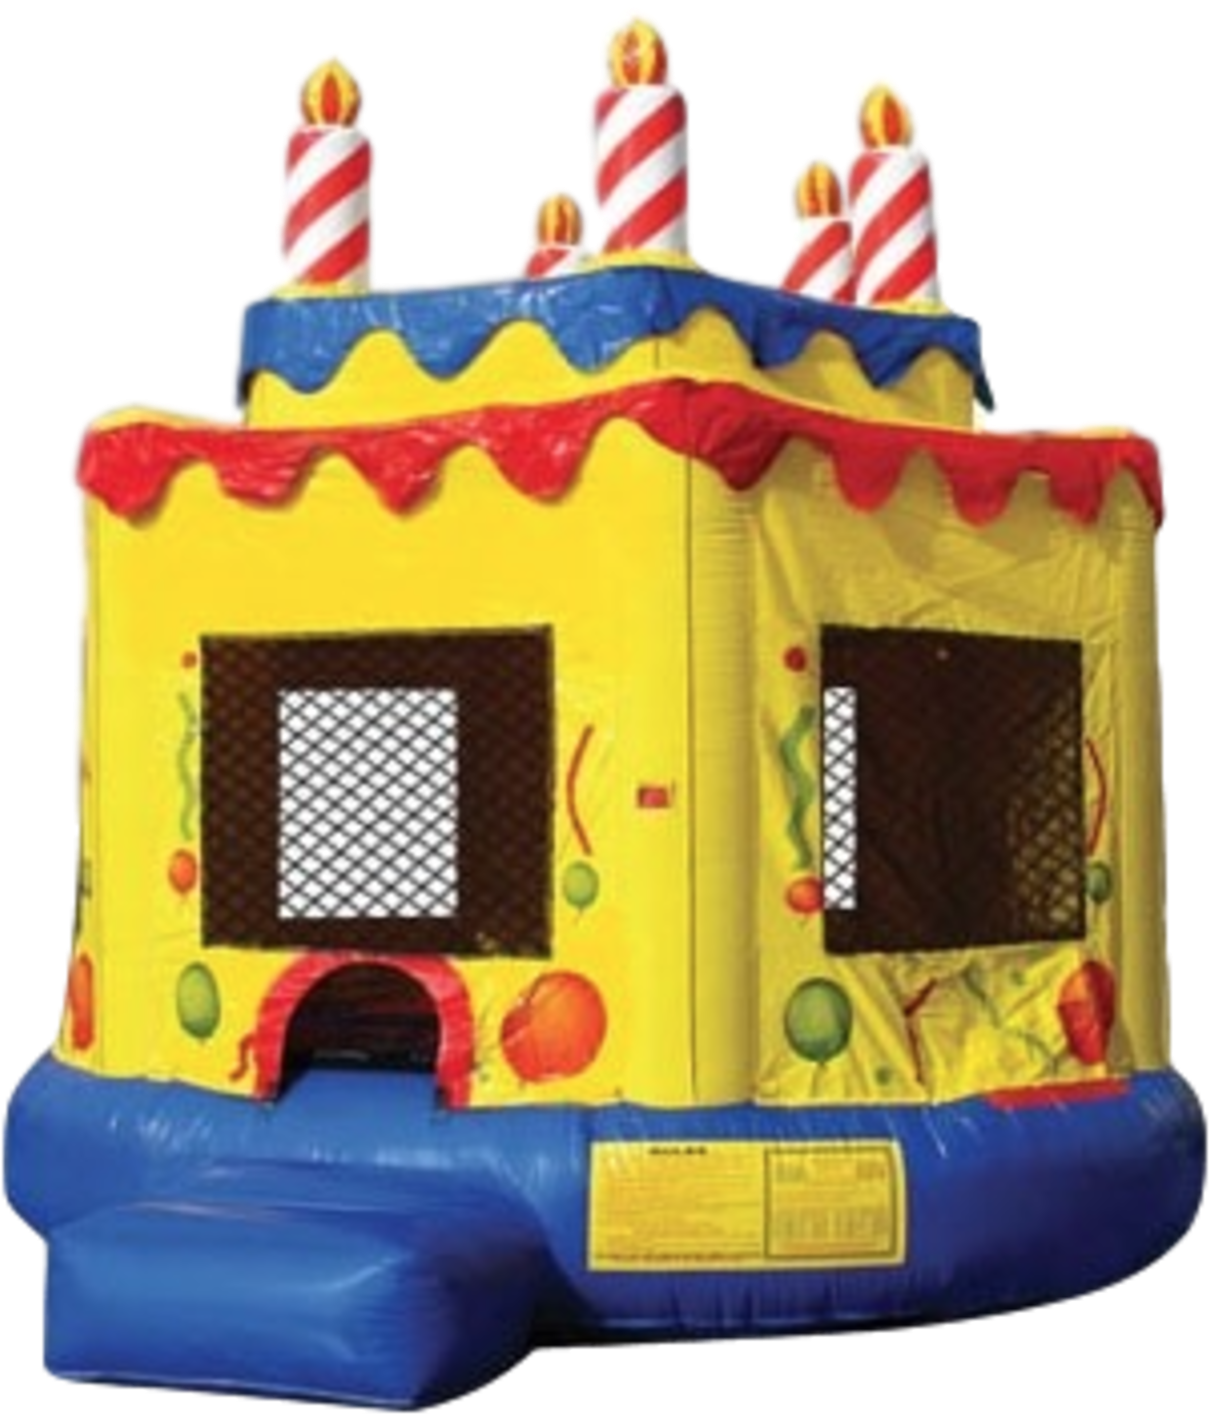 Cake Bounce - Birthday Cake Jumper (2000x1870), Png Download